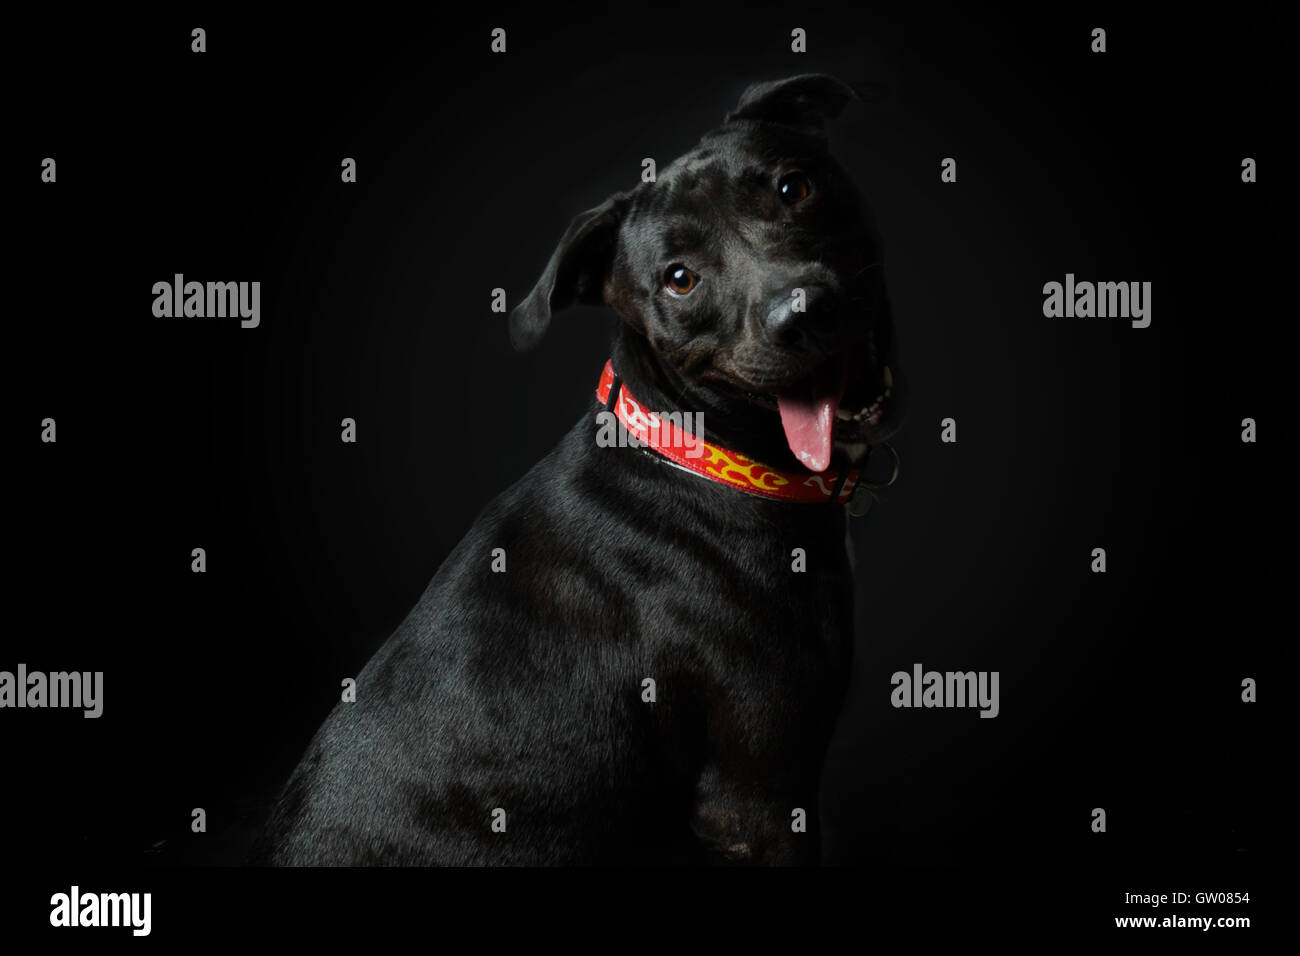 An american pitbull terrier smiling in black background Stock Photo